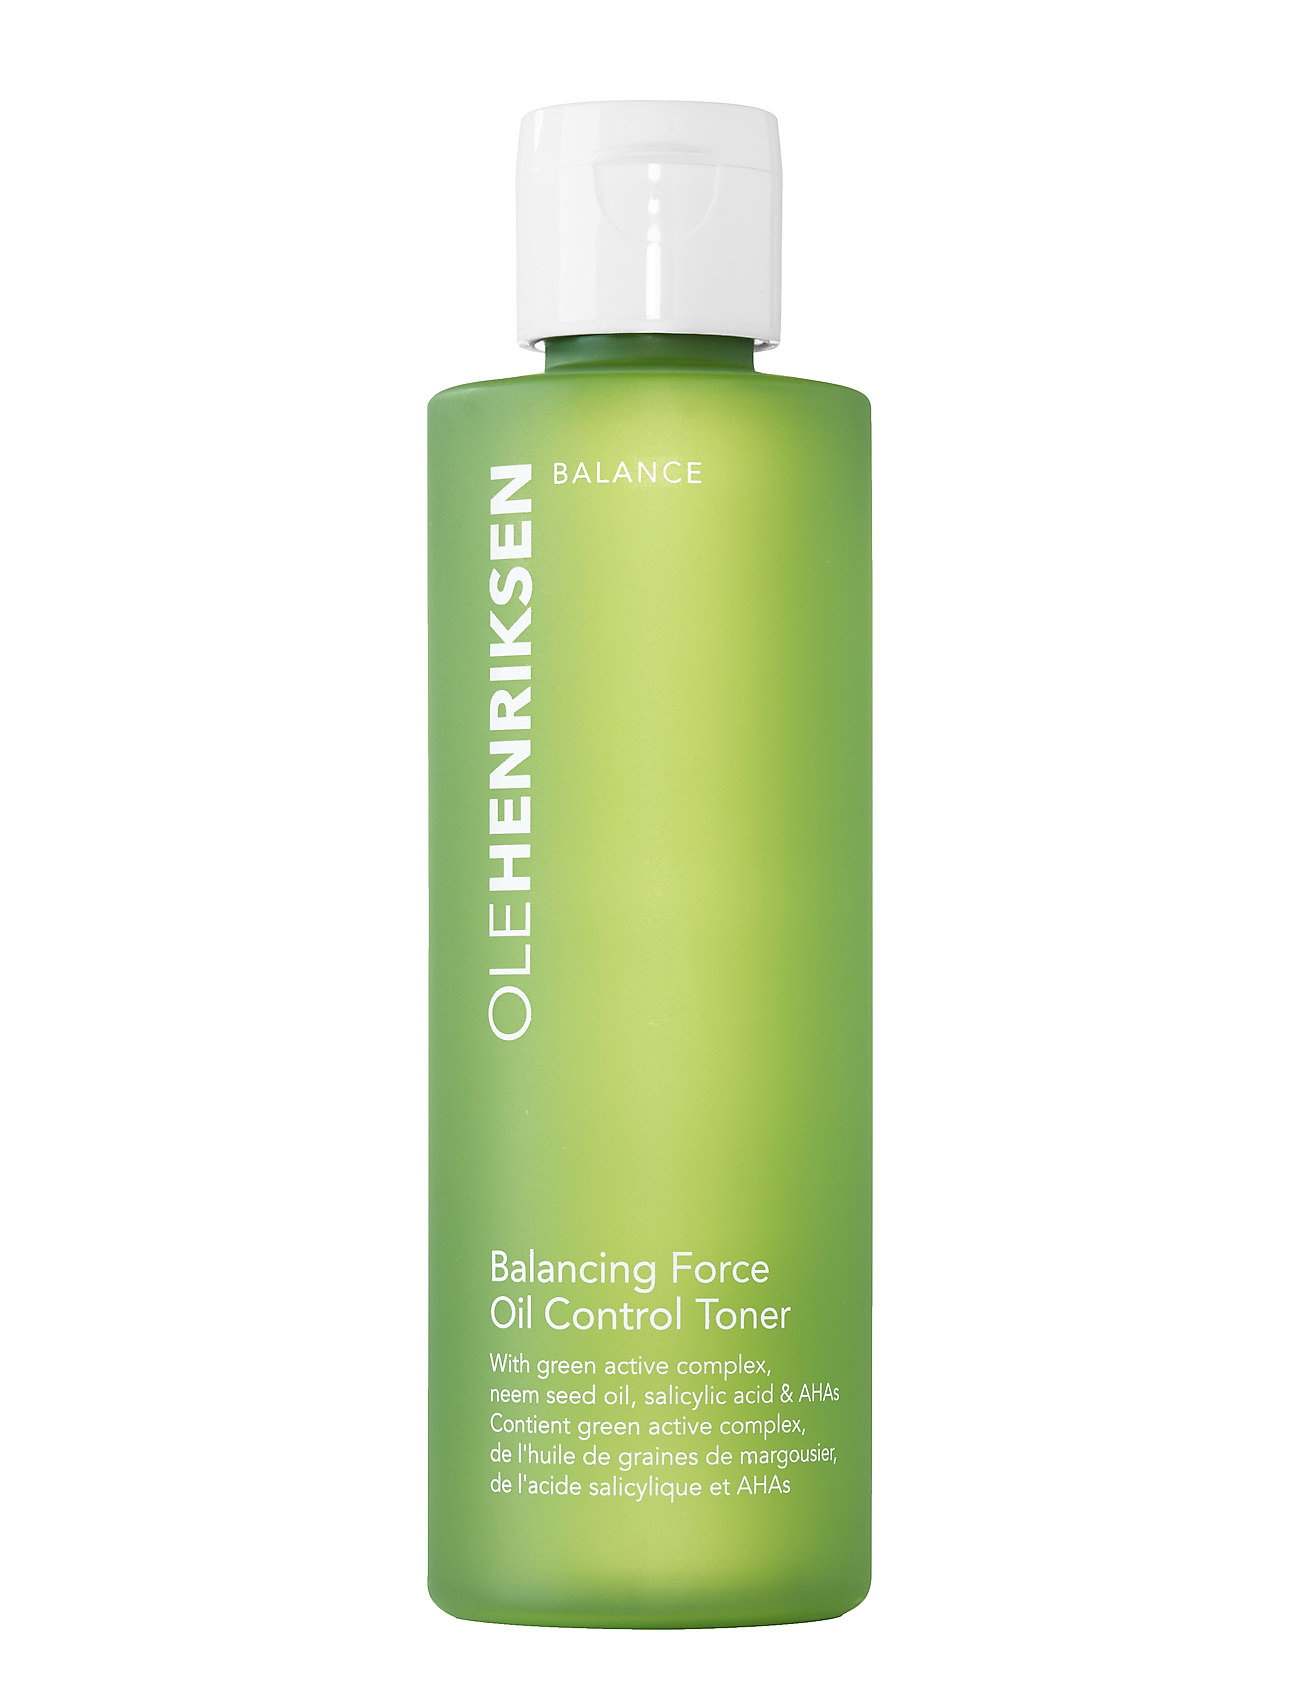 Balance Balancing Force Oil Control T R Beauty Women Skin Care Face T Rs Exfoliating T Rs Nude Ole Henriksen